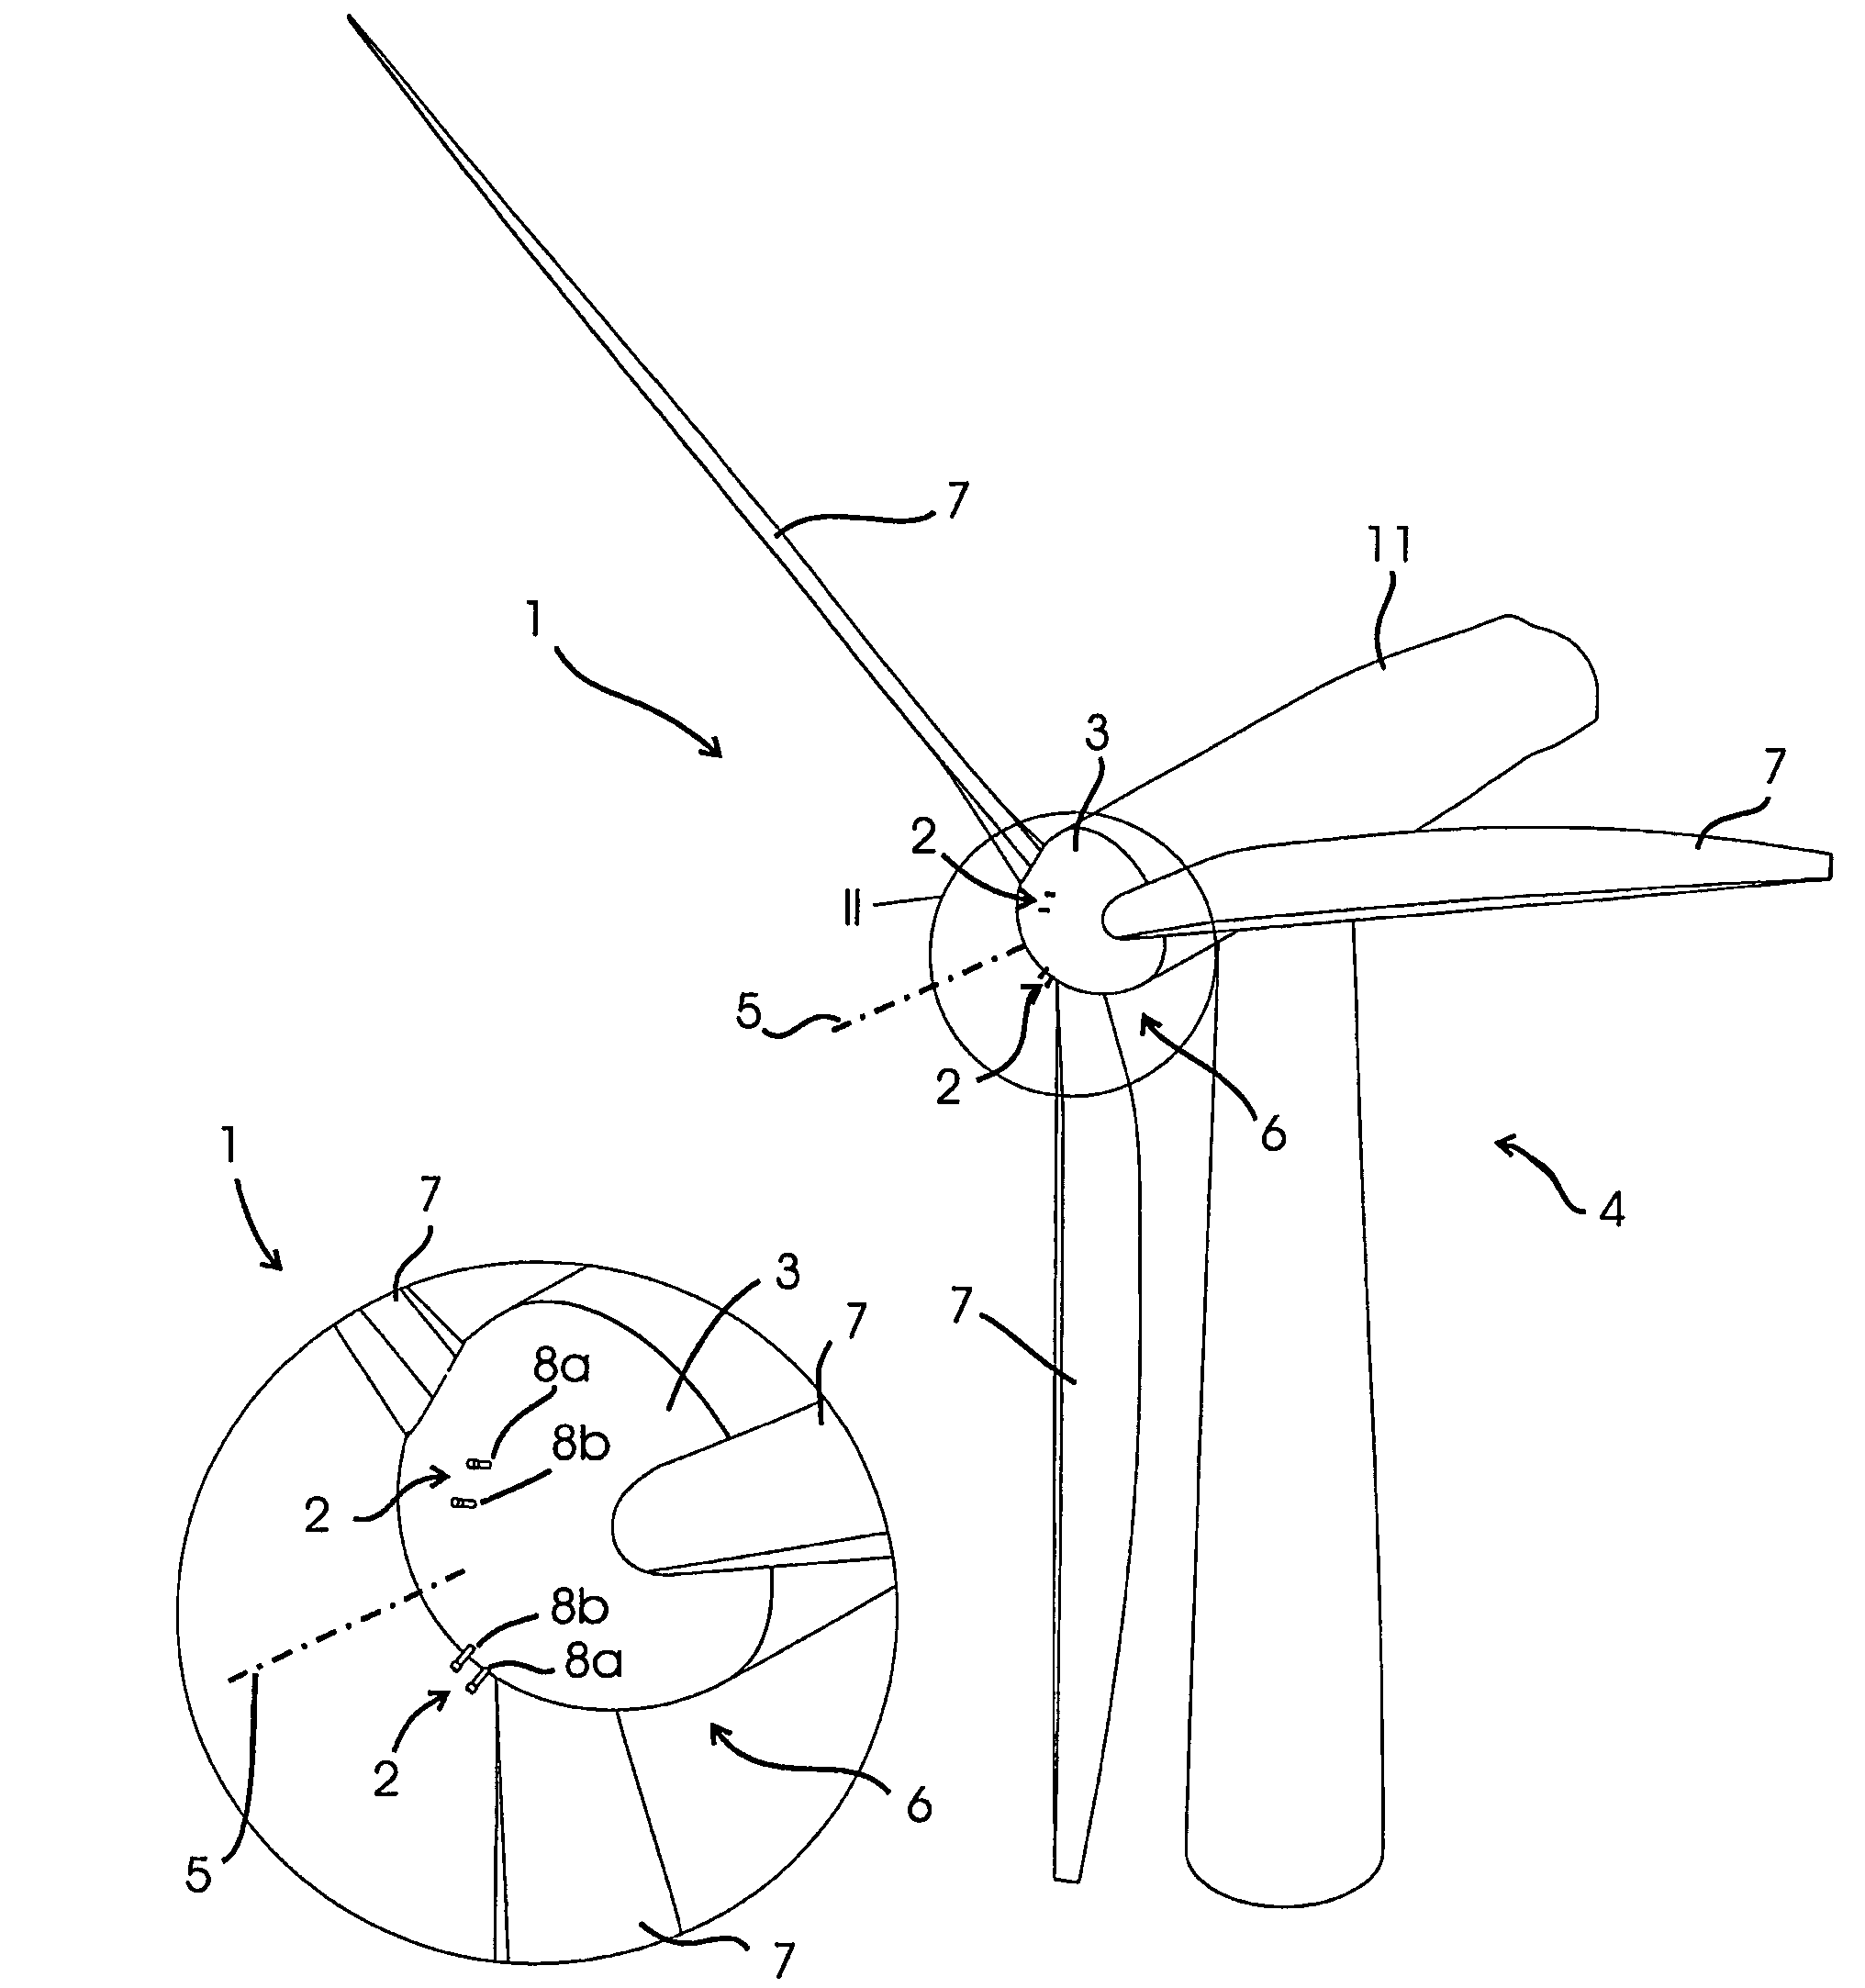 Method and apparatus to determine the wind speed and direction experienced by a wind turbine